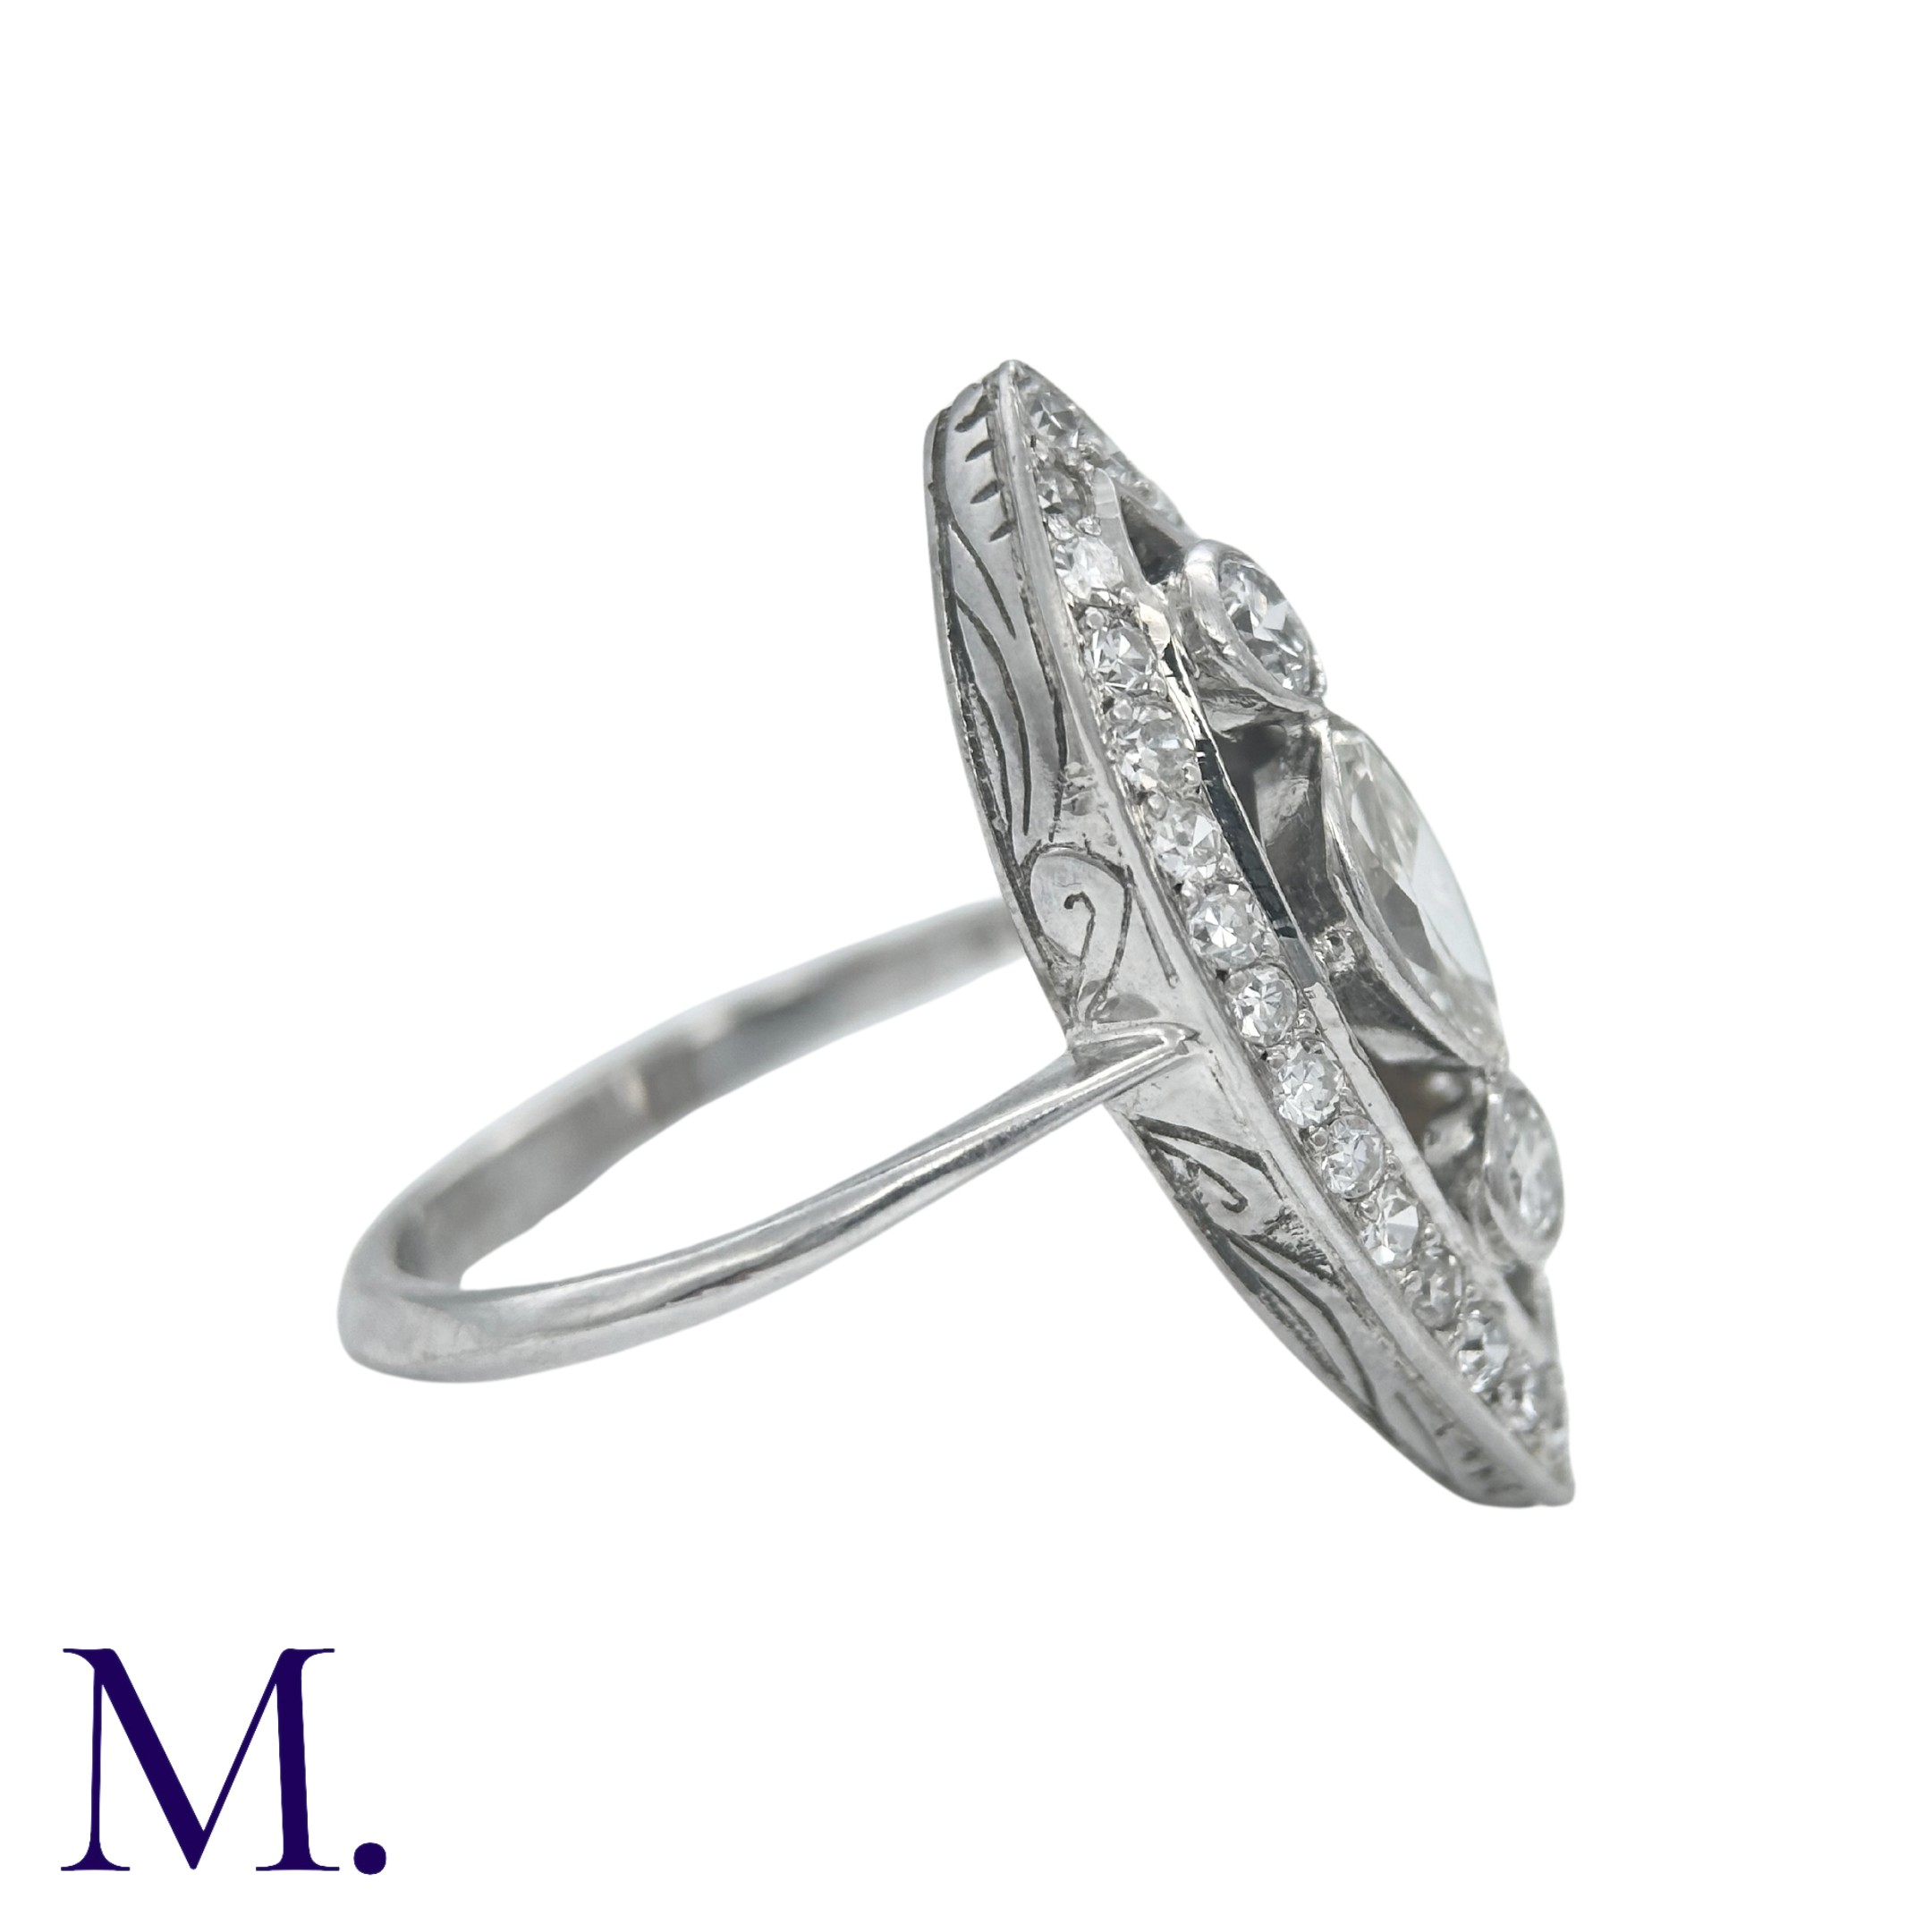 An Art Deco Diamond Ring in an openwork marquise shape with two principal round cut diamonds of - Image 2 of 6